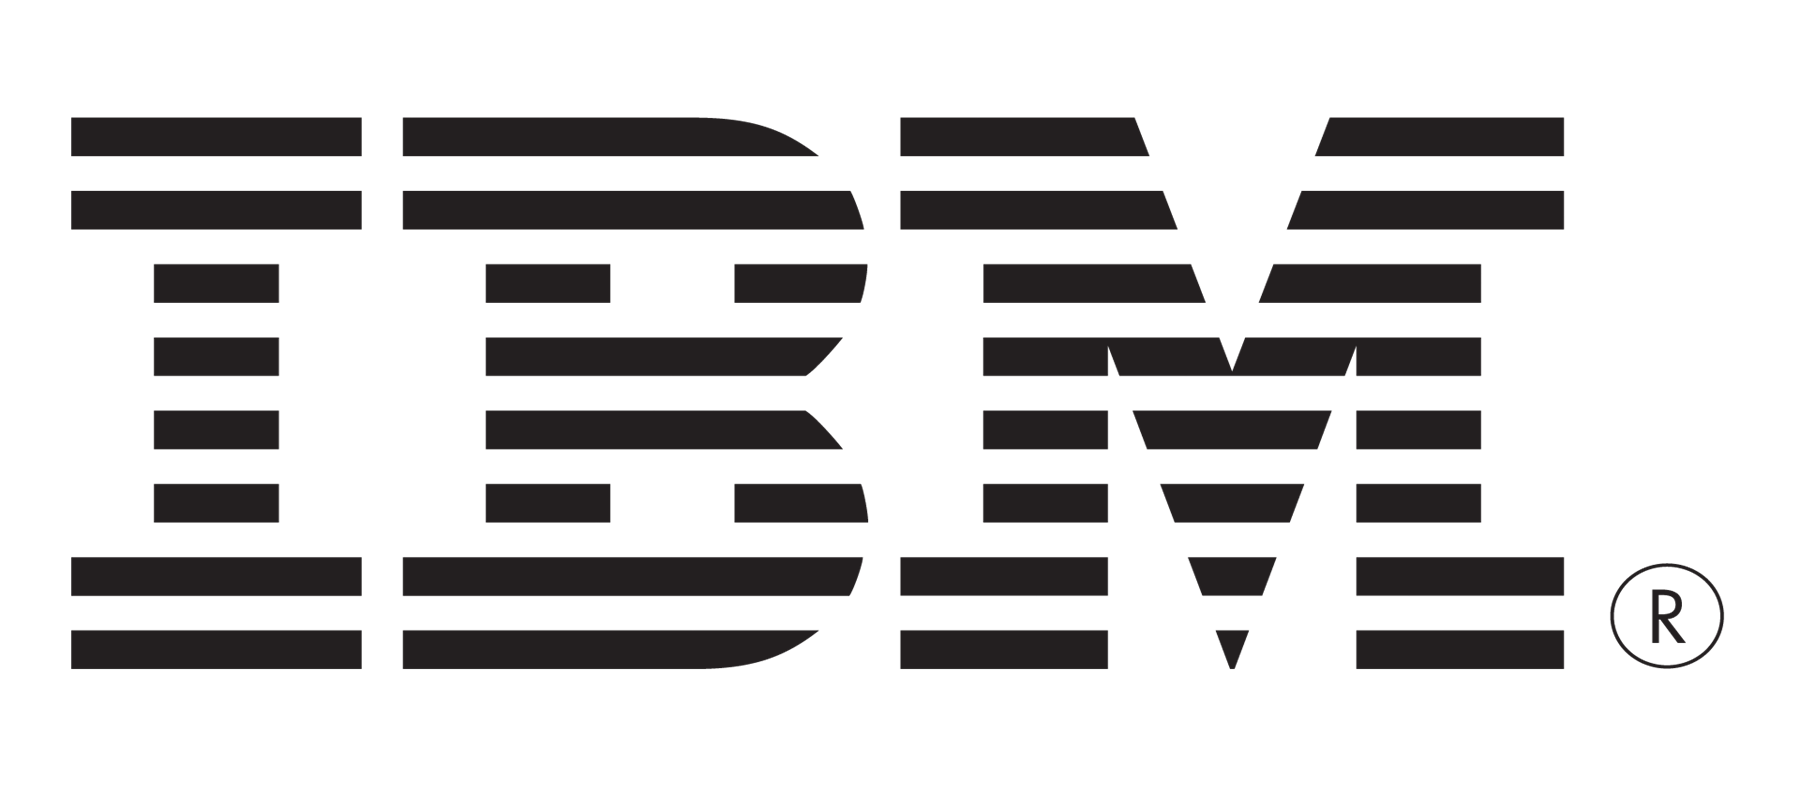 IBM introduces new Microsoft offering to fuel AI-powered business transformation